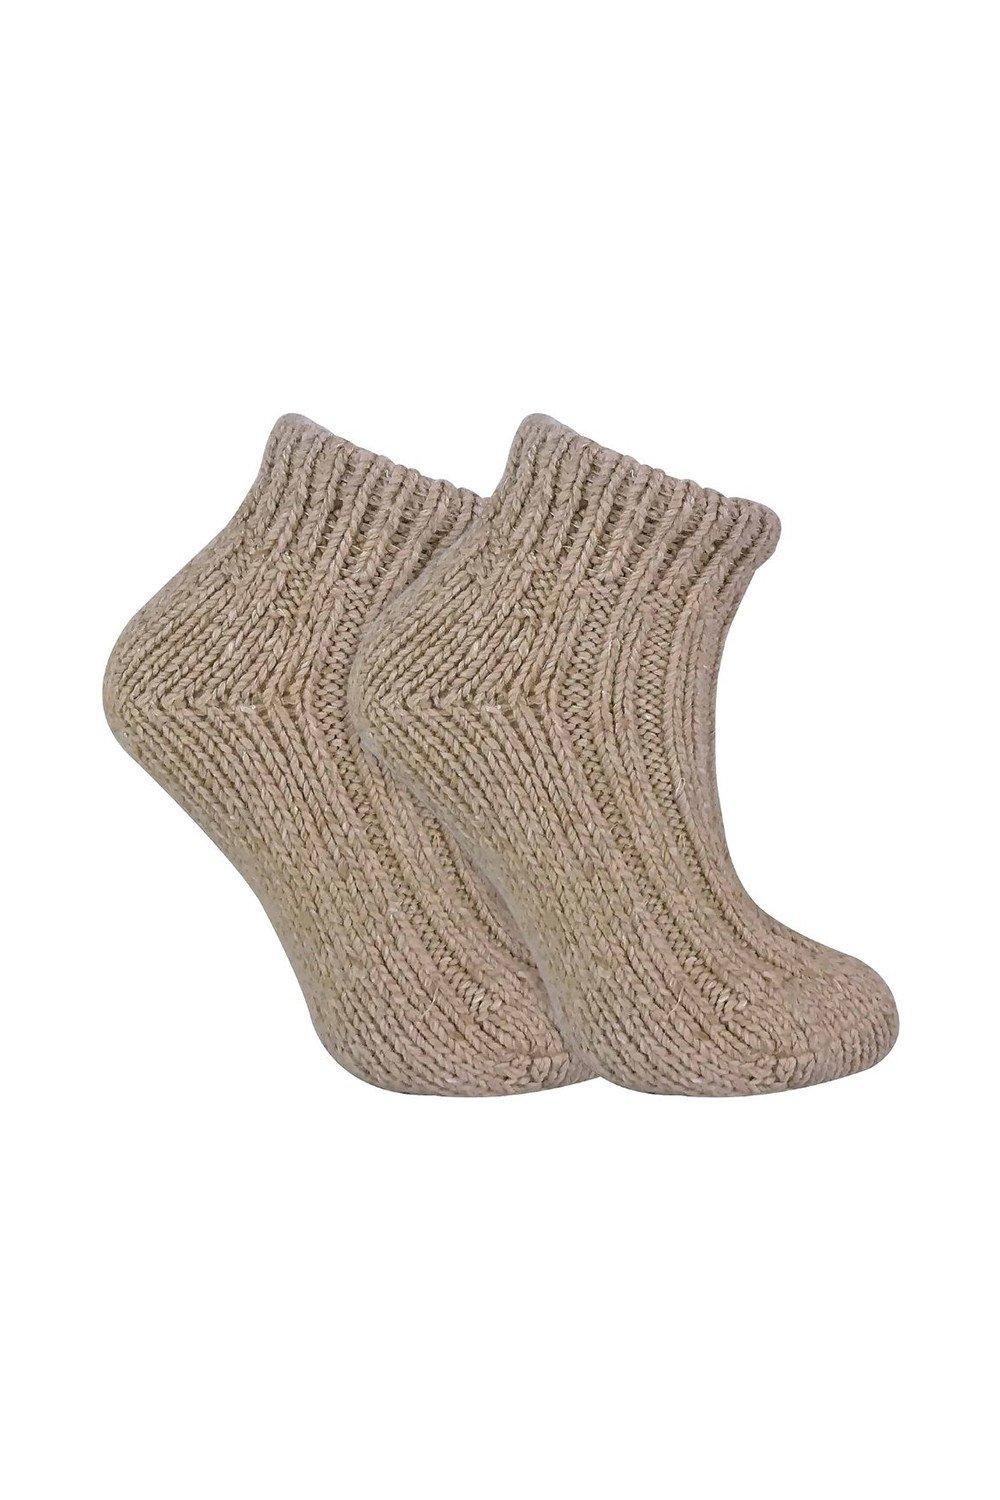 Chunky Ribbed Low Cut Wool Blend Ankle Boot Socks